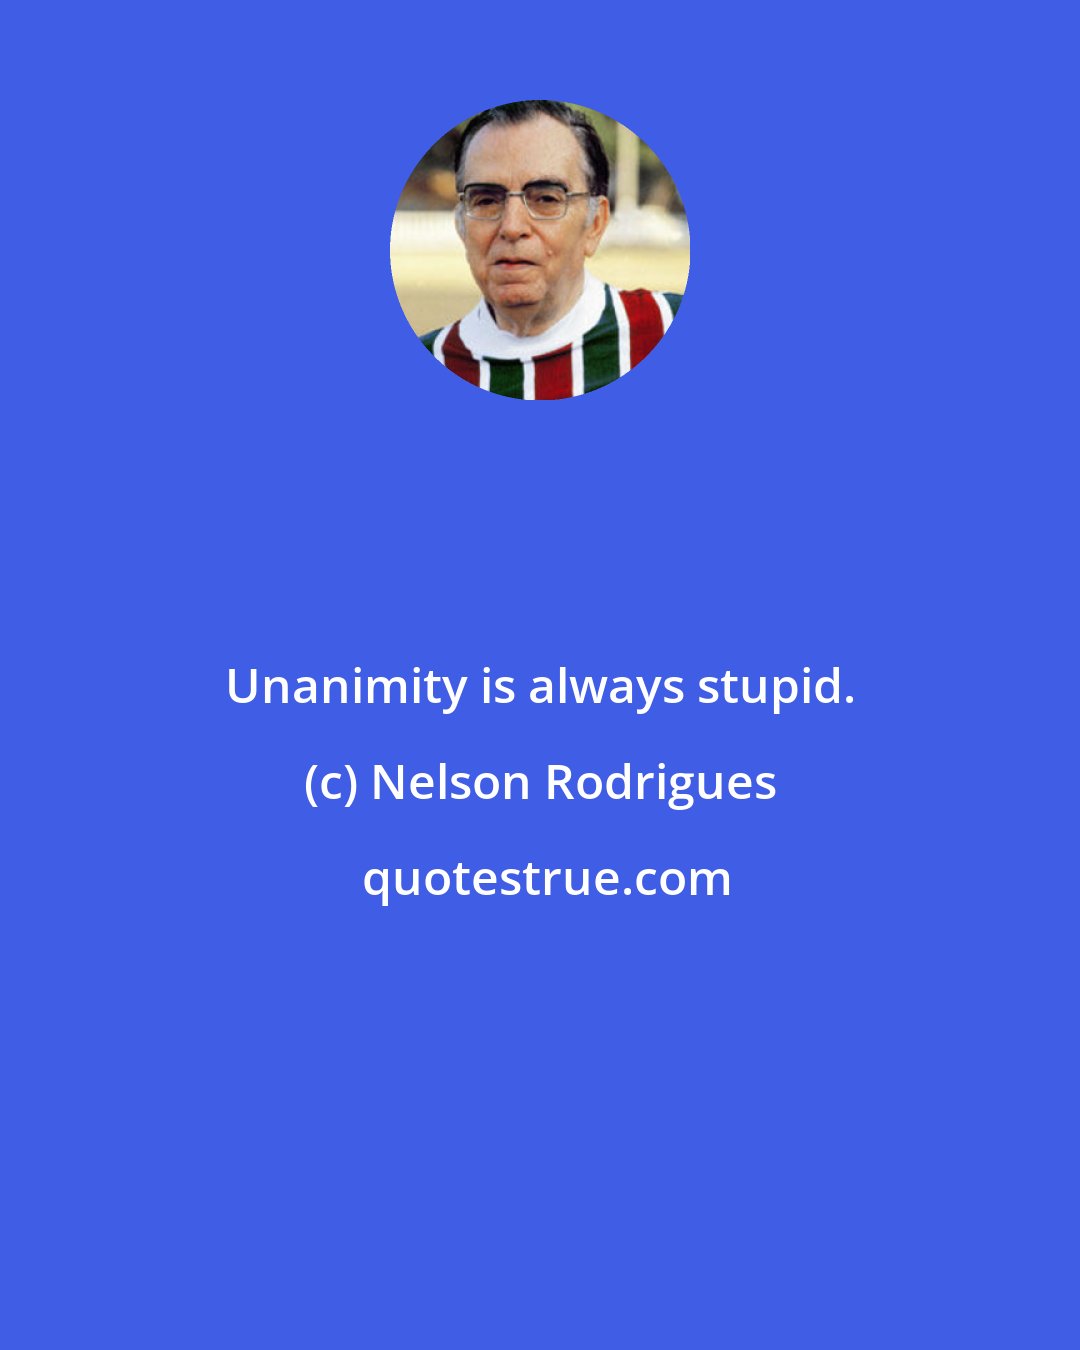 Nelson Rodrigues: Unanimity is always stupid.